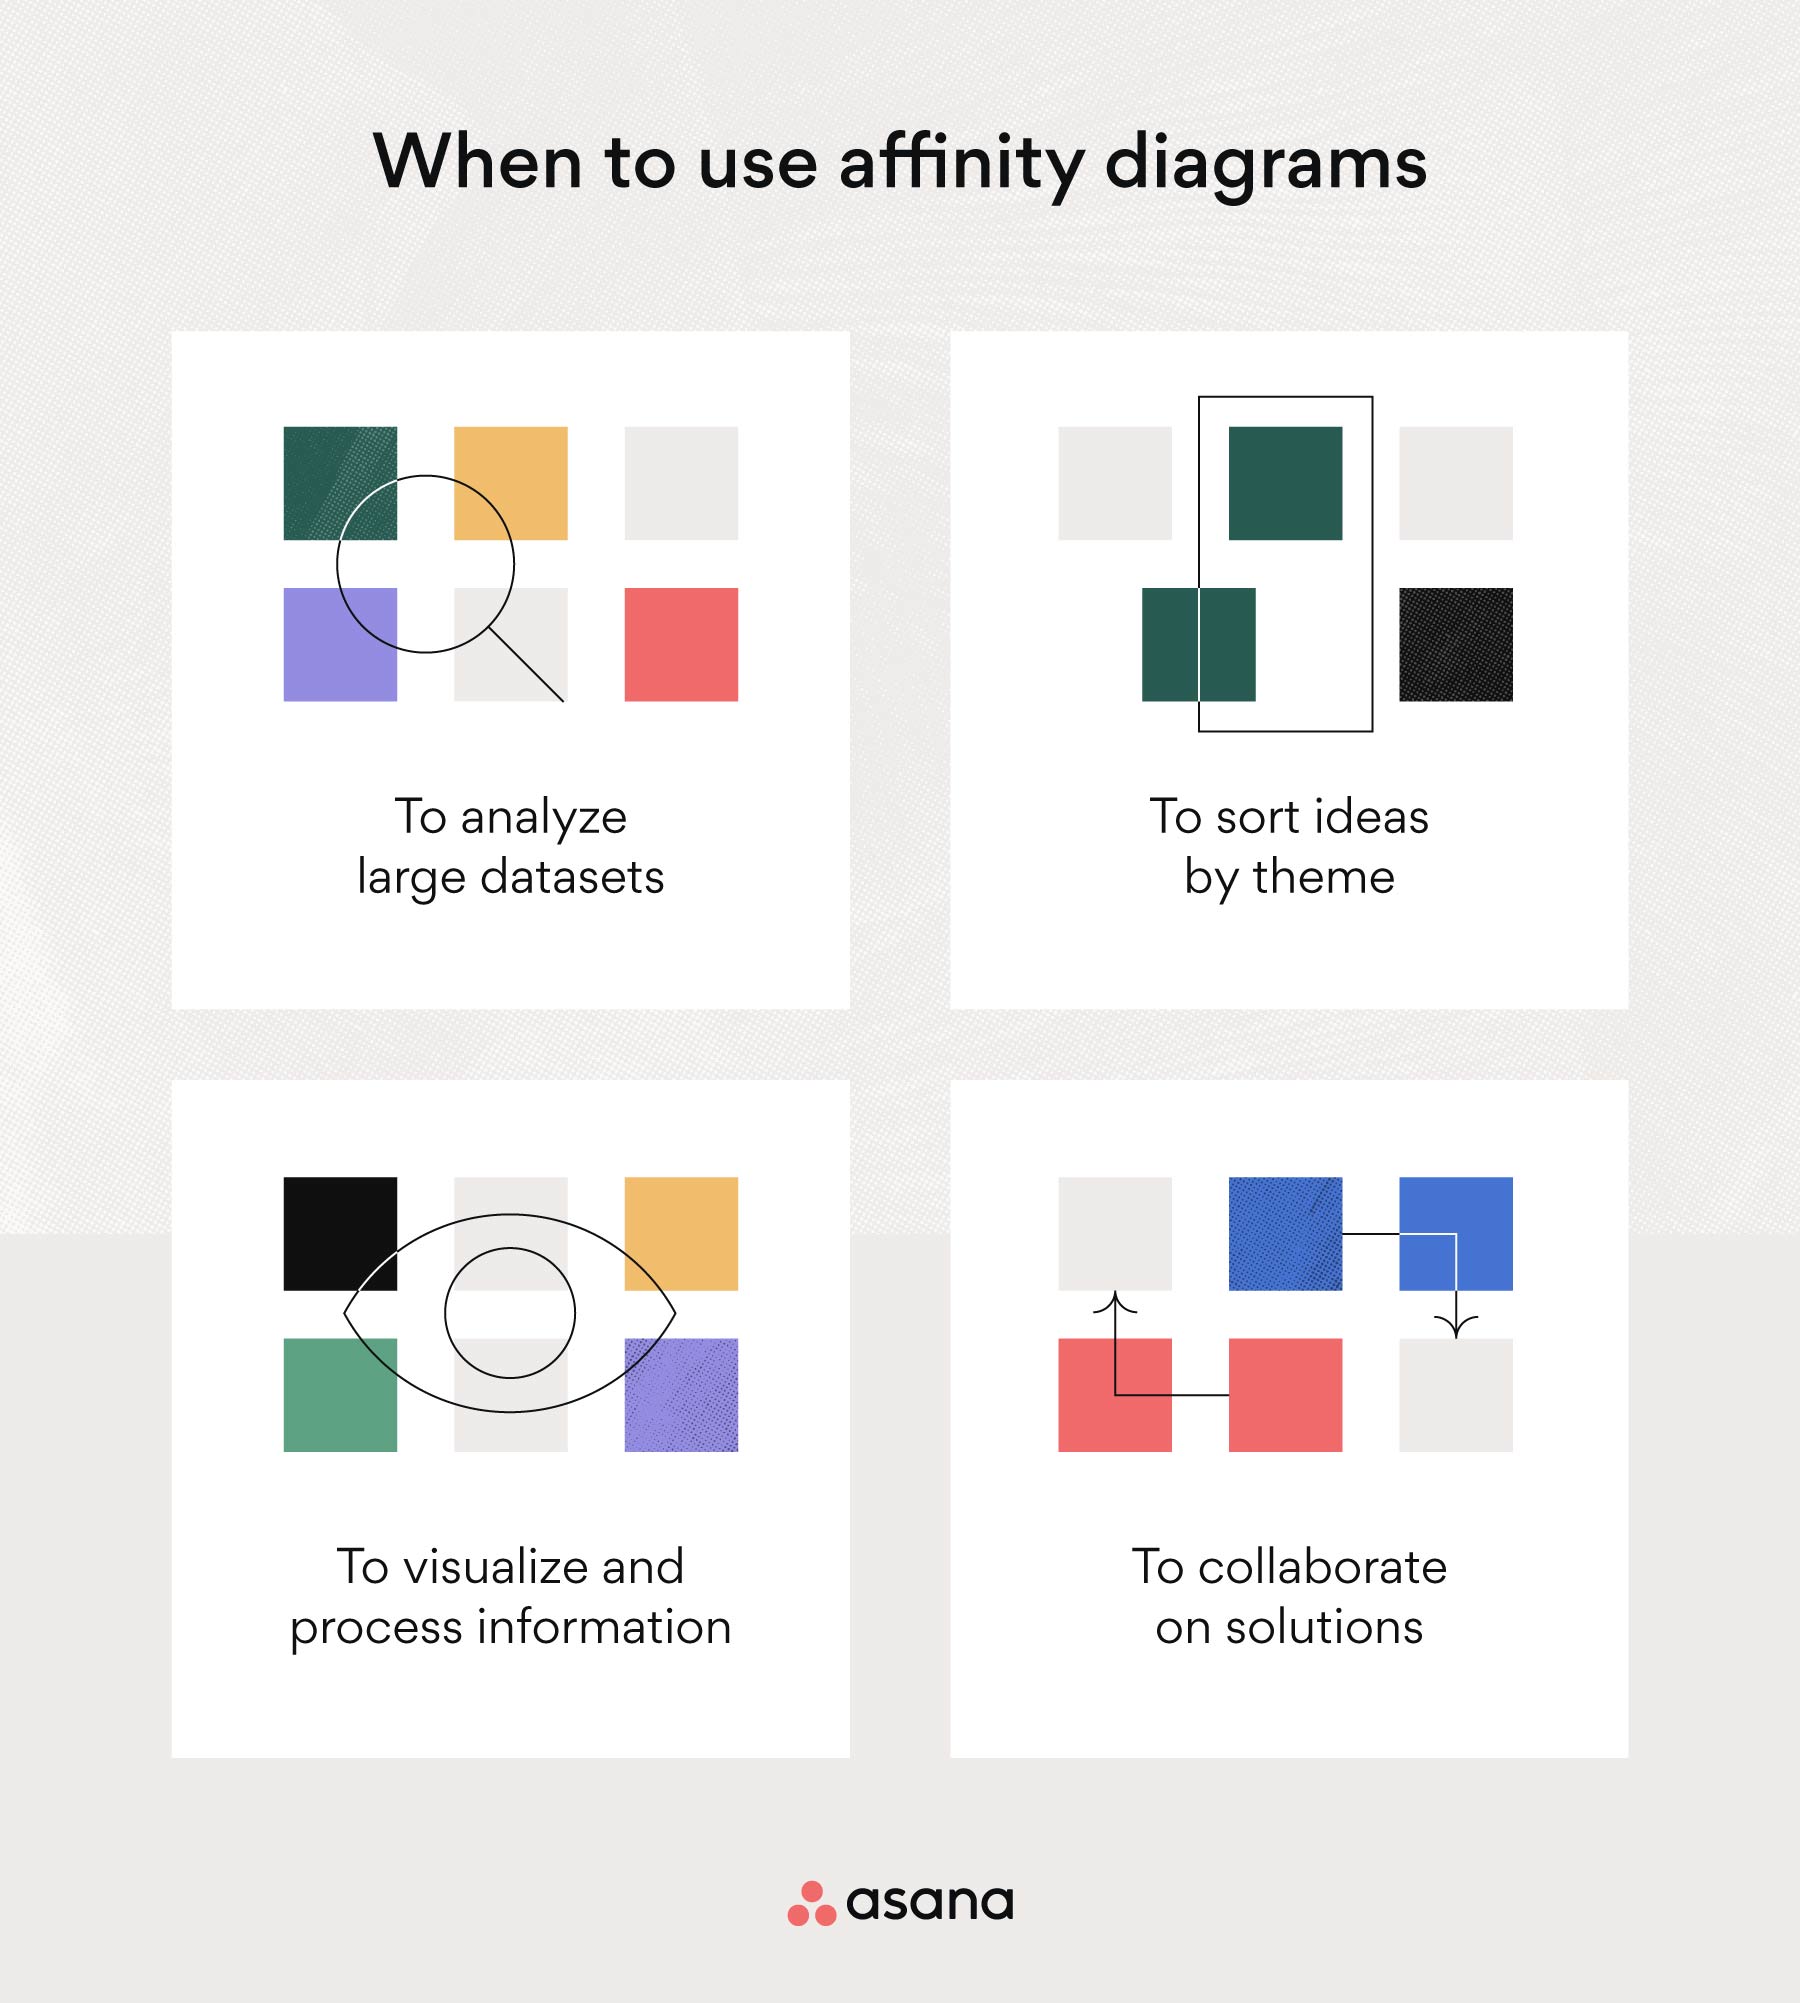 [inline illustration] When to use affinity diagrams (infographic)